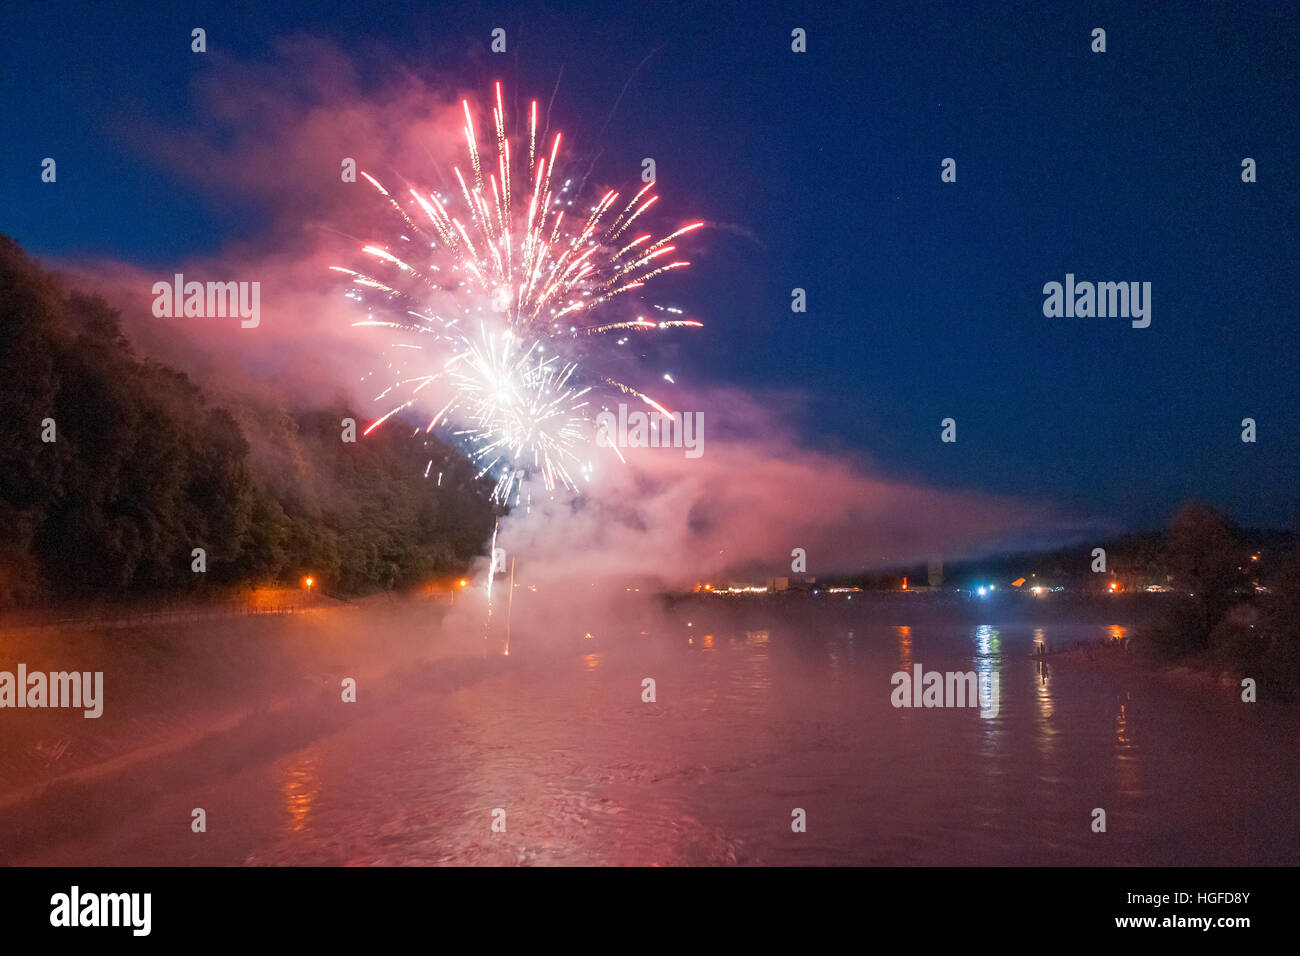 Fireworks in Laufen a.d. Salzach during solistice, Stock Photo